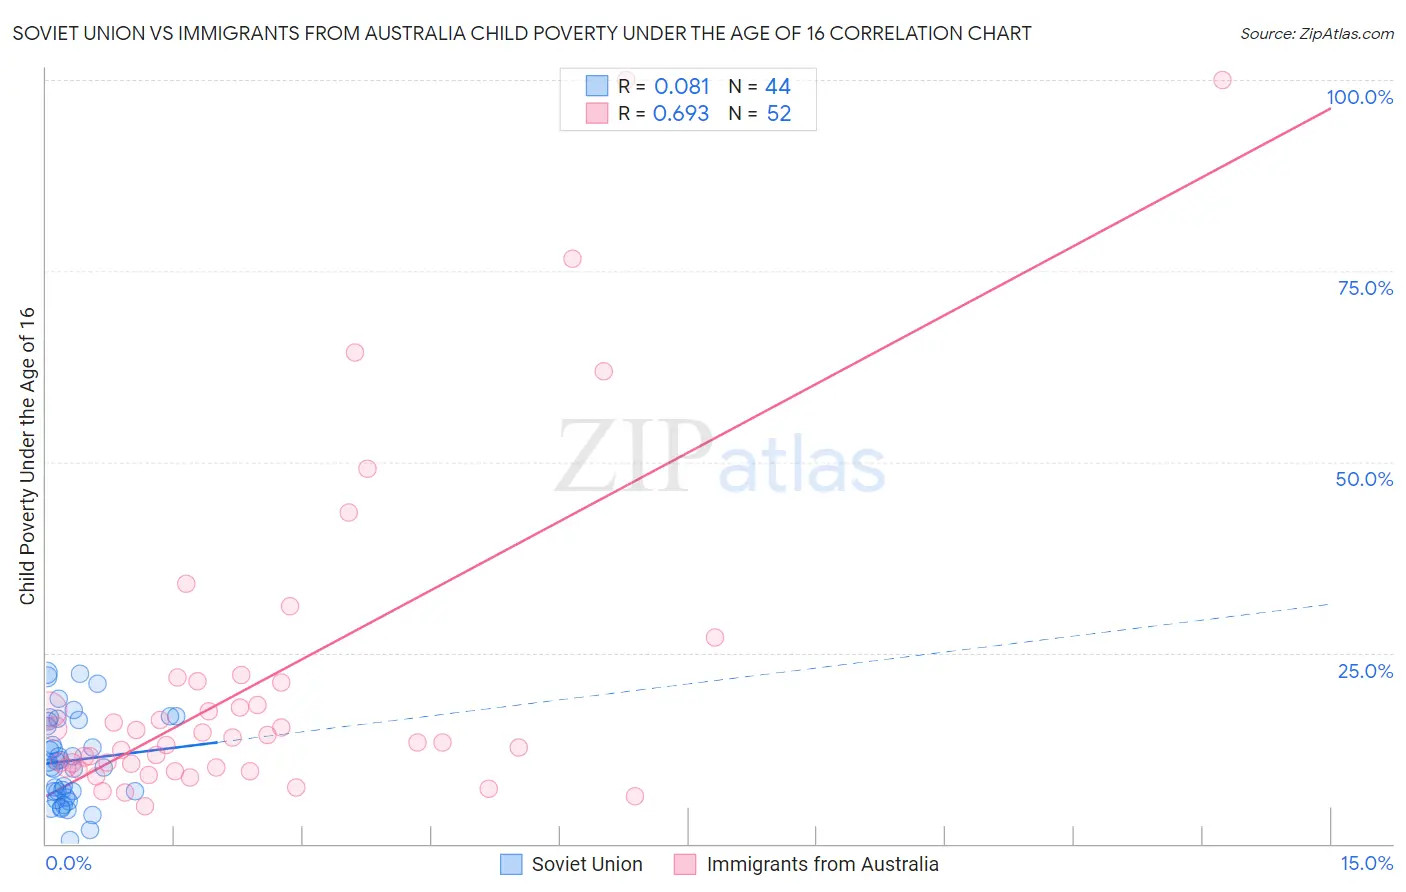 Soviet Union vs Immigrants from Australia Child Poverty Under the Age of 16